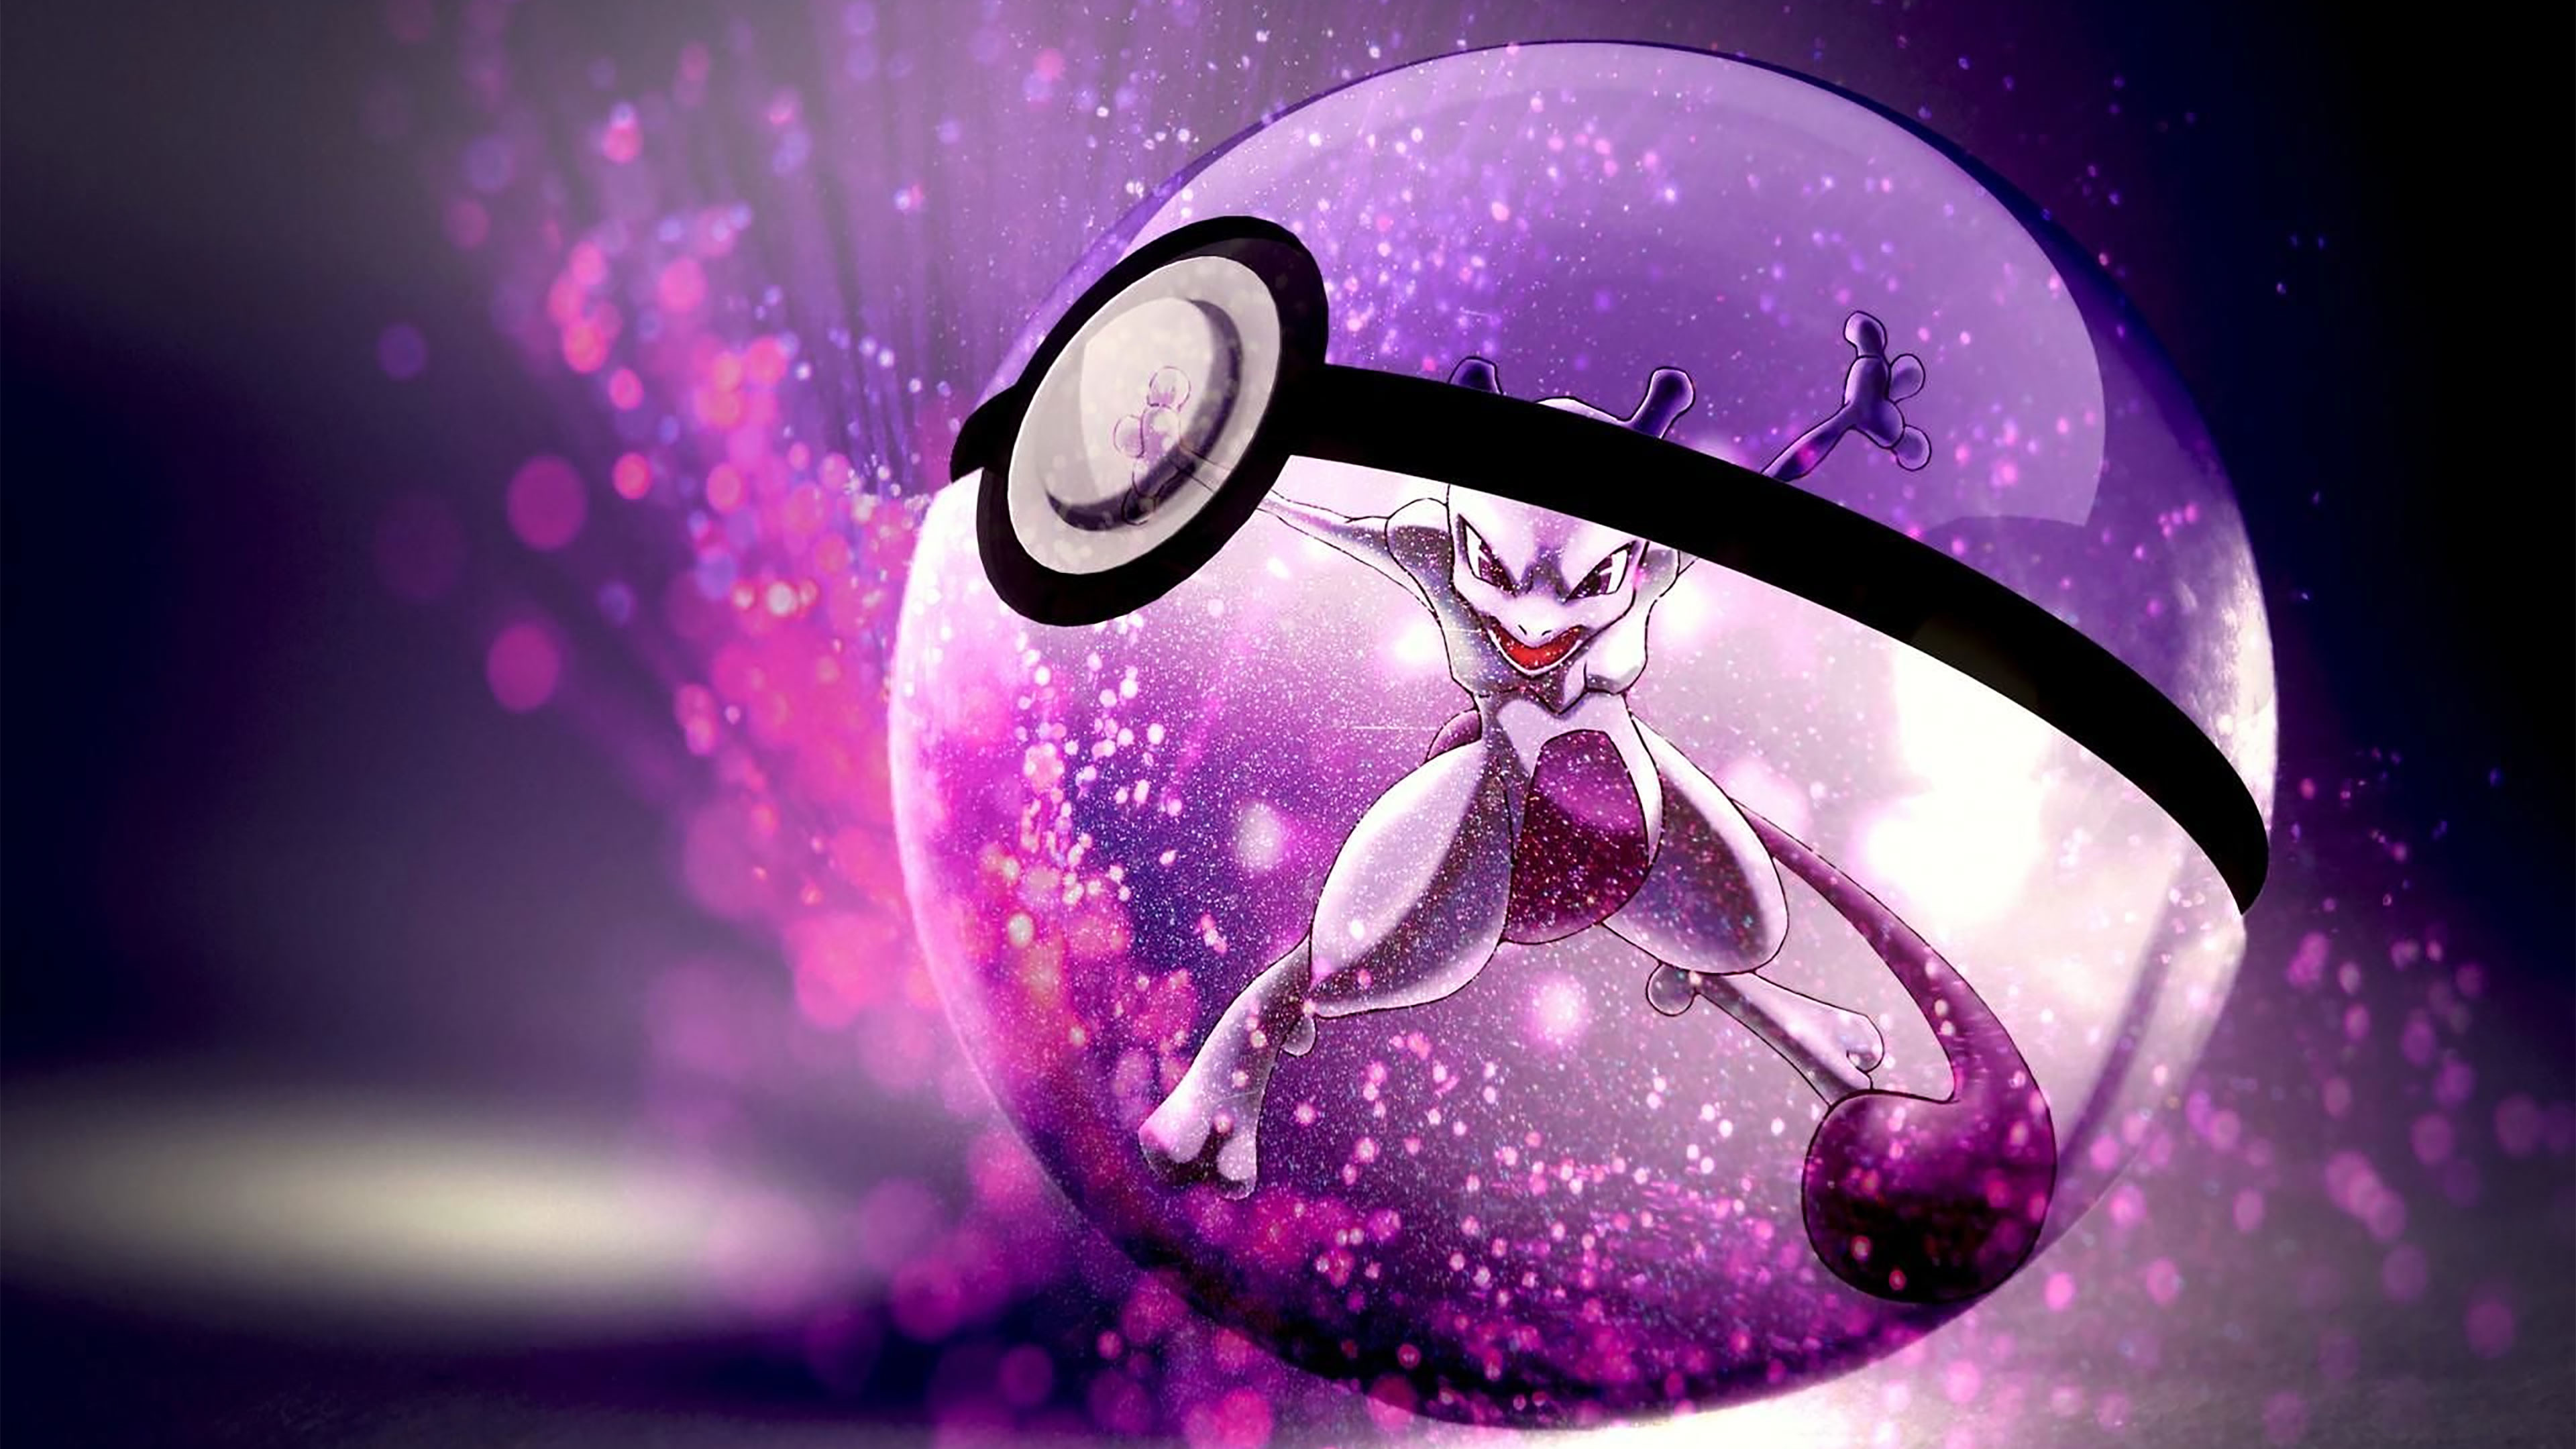 Mewtwo Wallpapers APK for Android Download